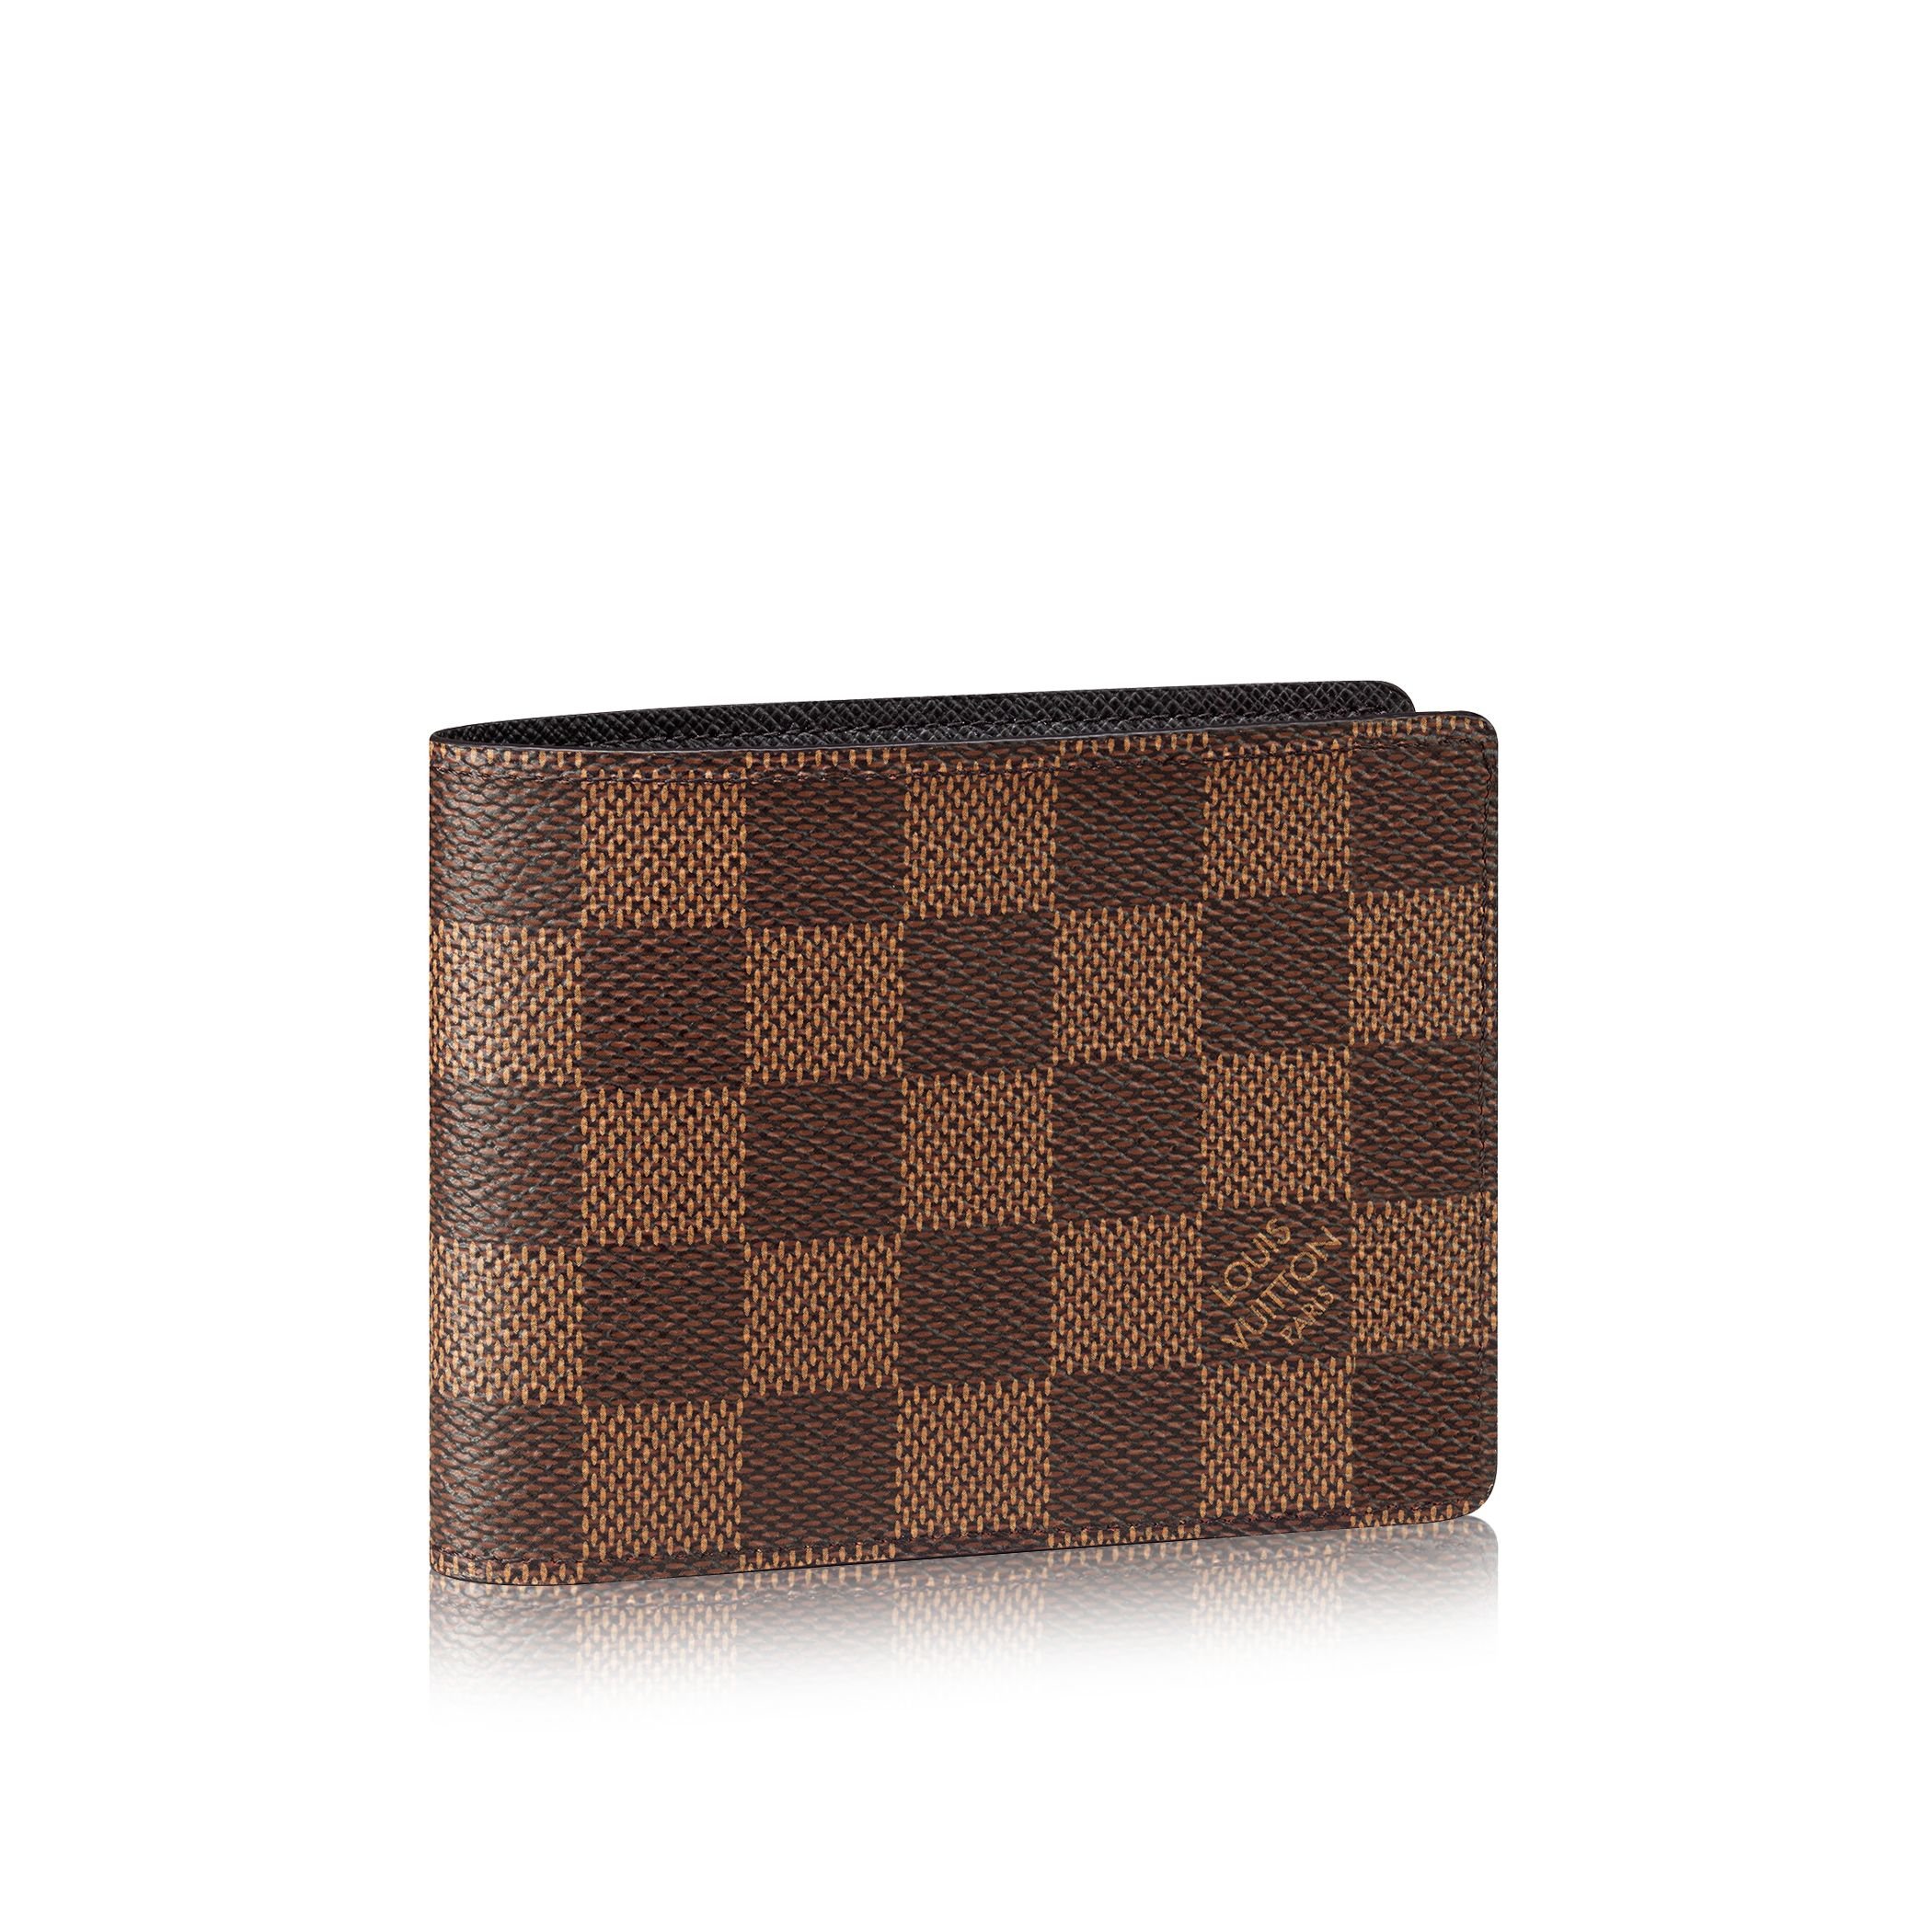 Are Louis Vuitton Mens Wallets Worth It | SEMA Data Co-op